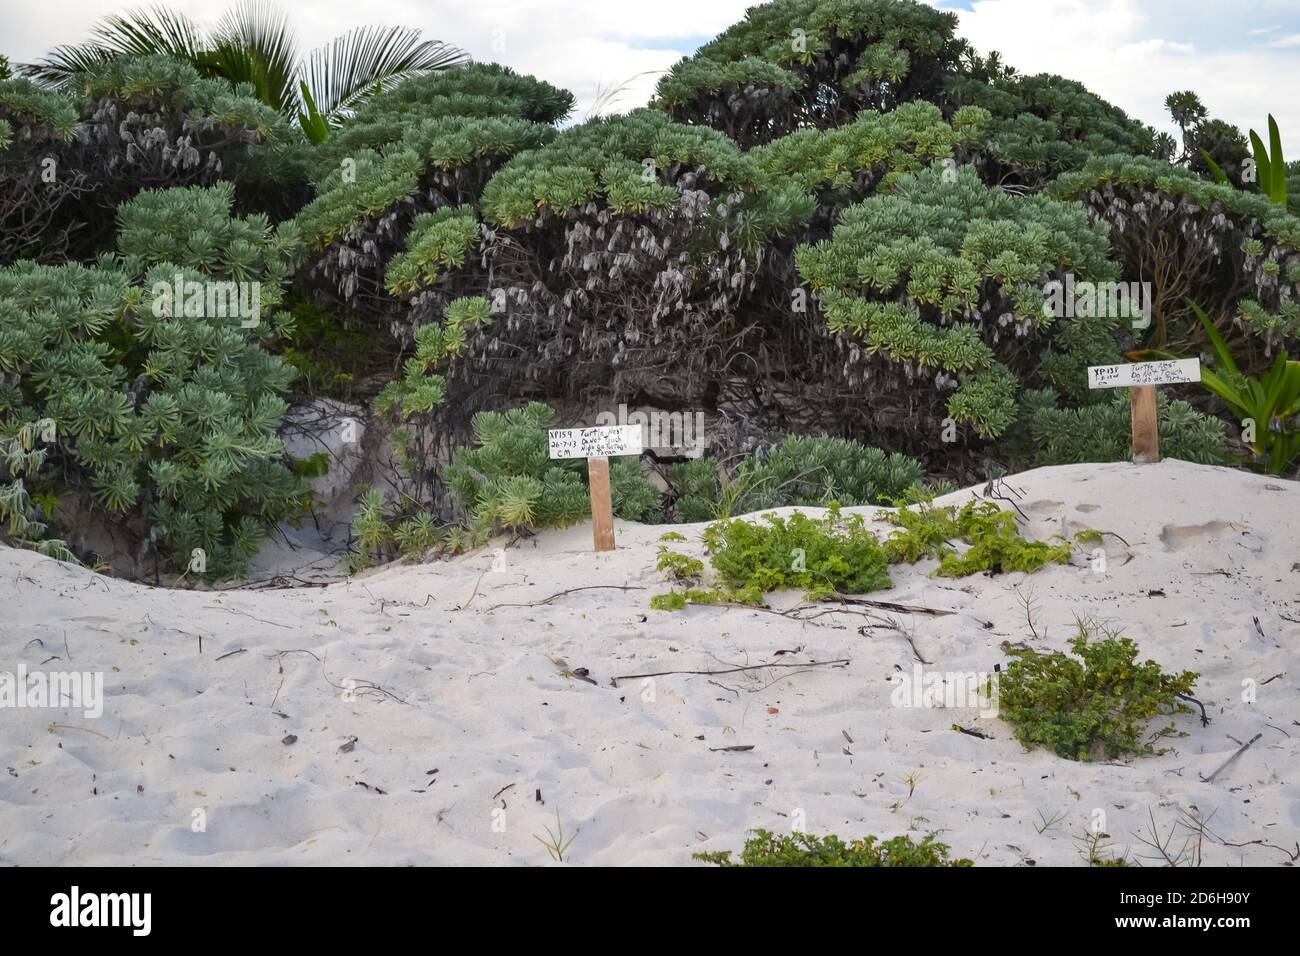 Protected site for the nesting of sea turtles on the white beaches of Mexico. Stock Photo